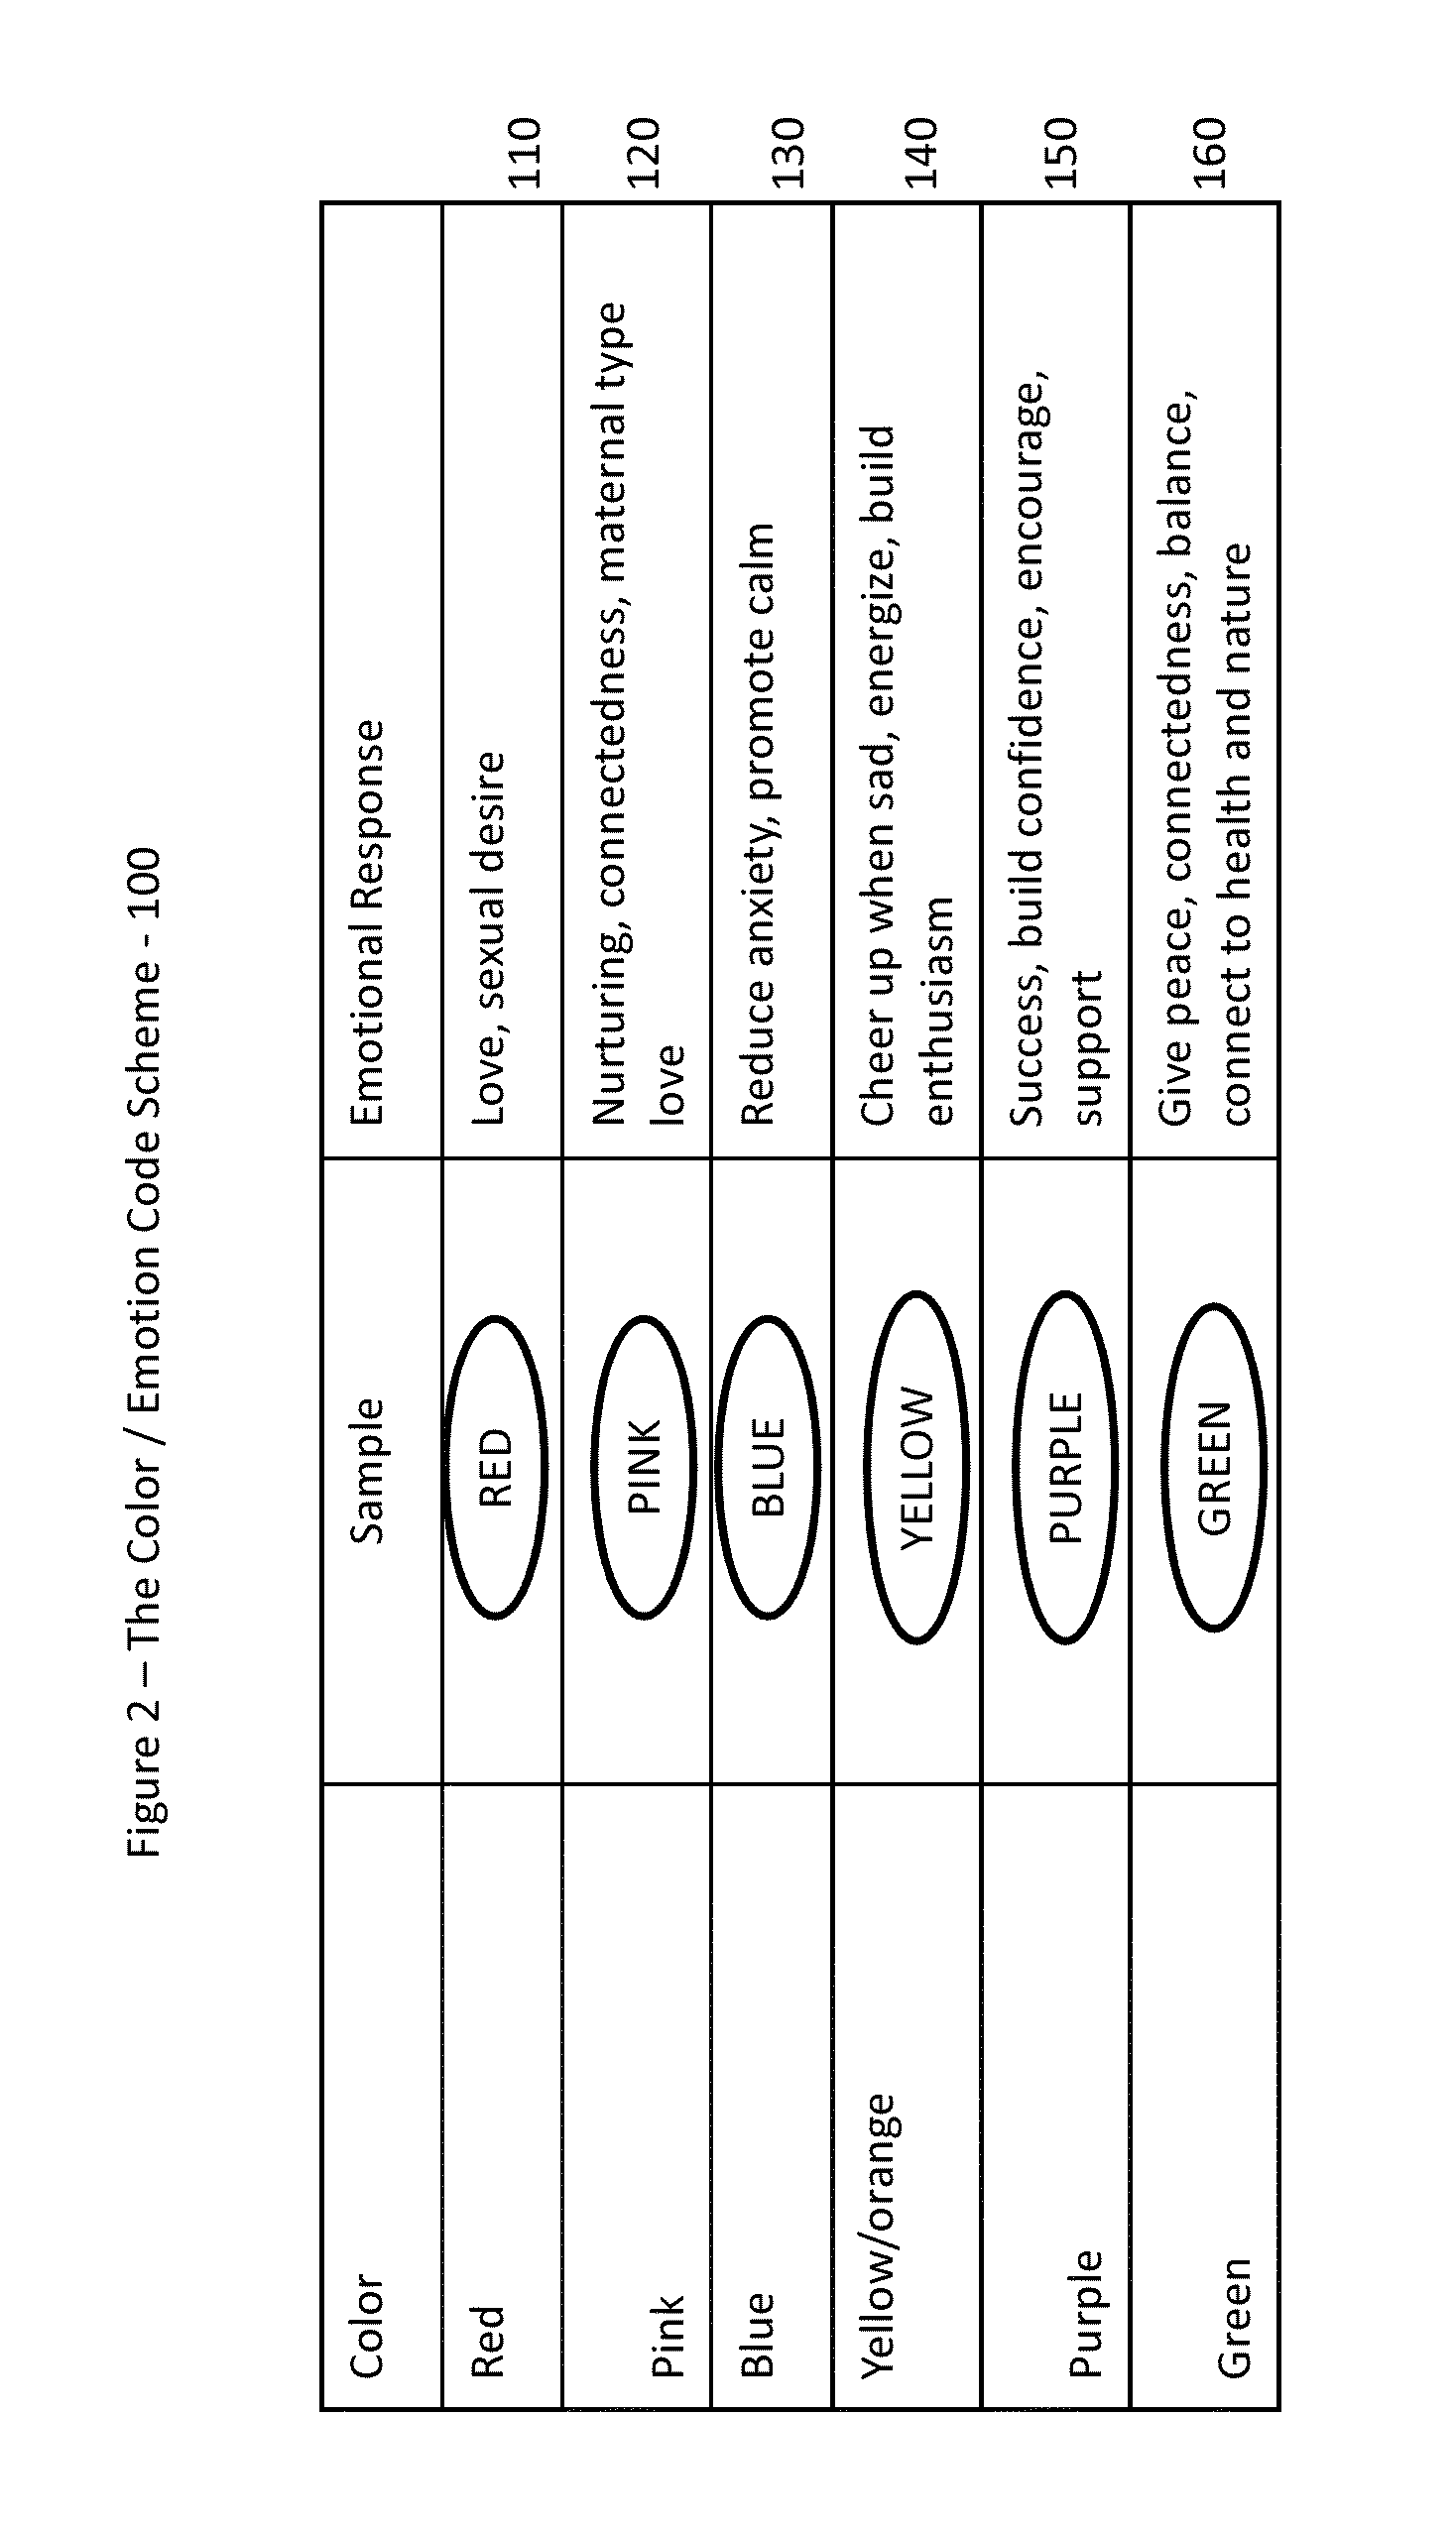 System and method to evaluate, present, and facilitate the advertisement and purchasing of products and services based on the emotion evoked in a recipient upon receipt of the product or service